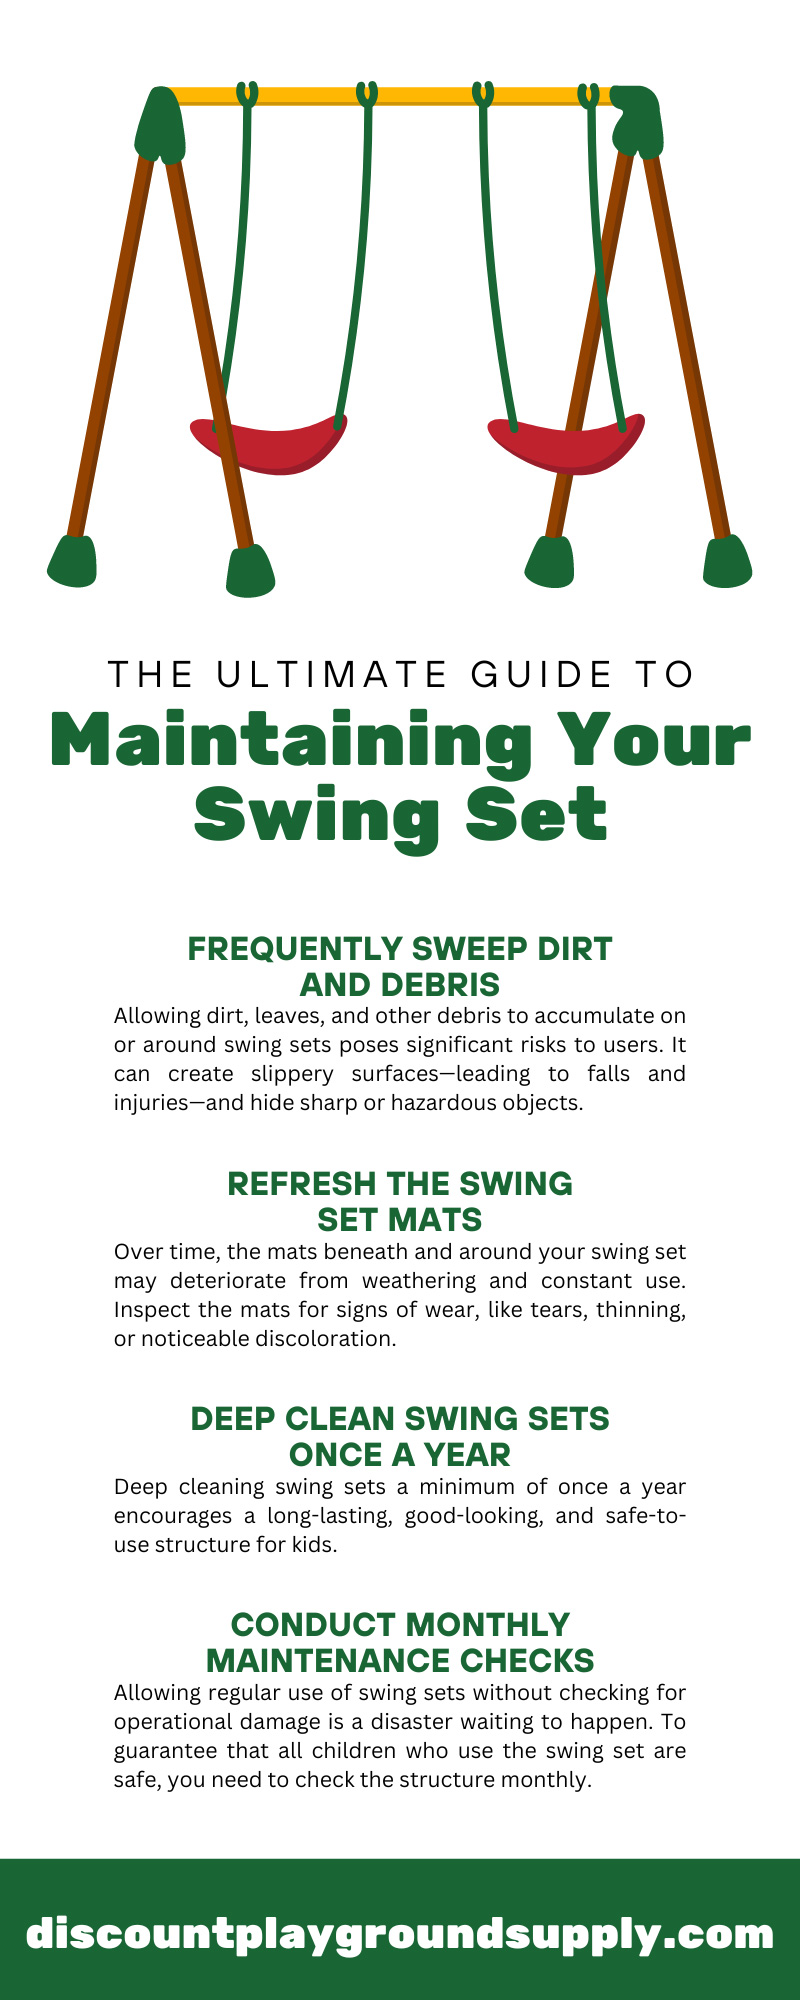 The Ultimate Guide to Maintaining Your Swing Set